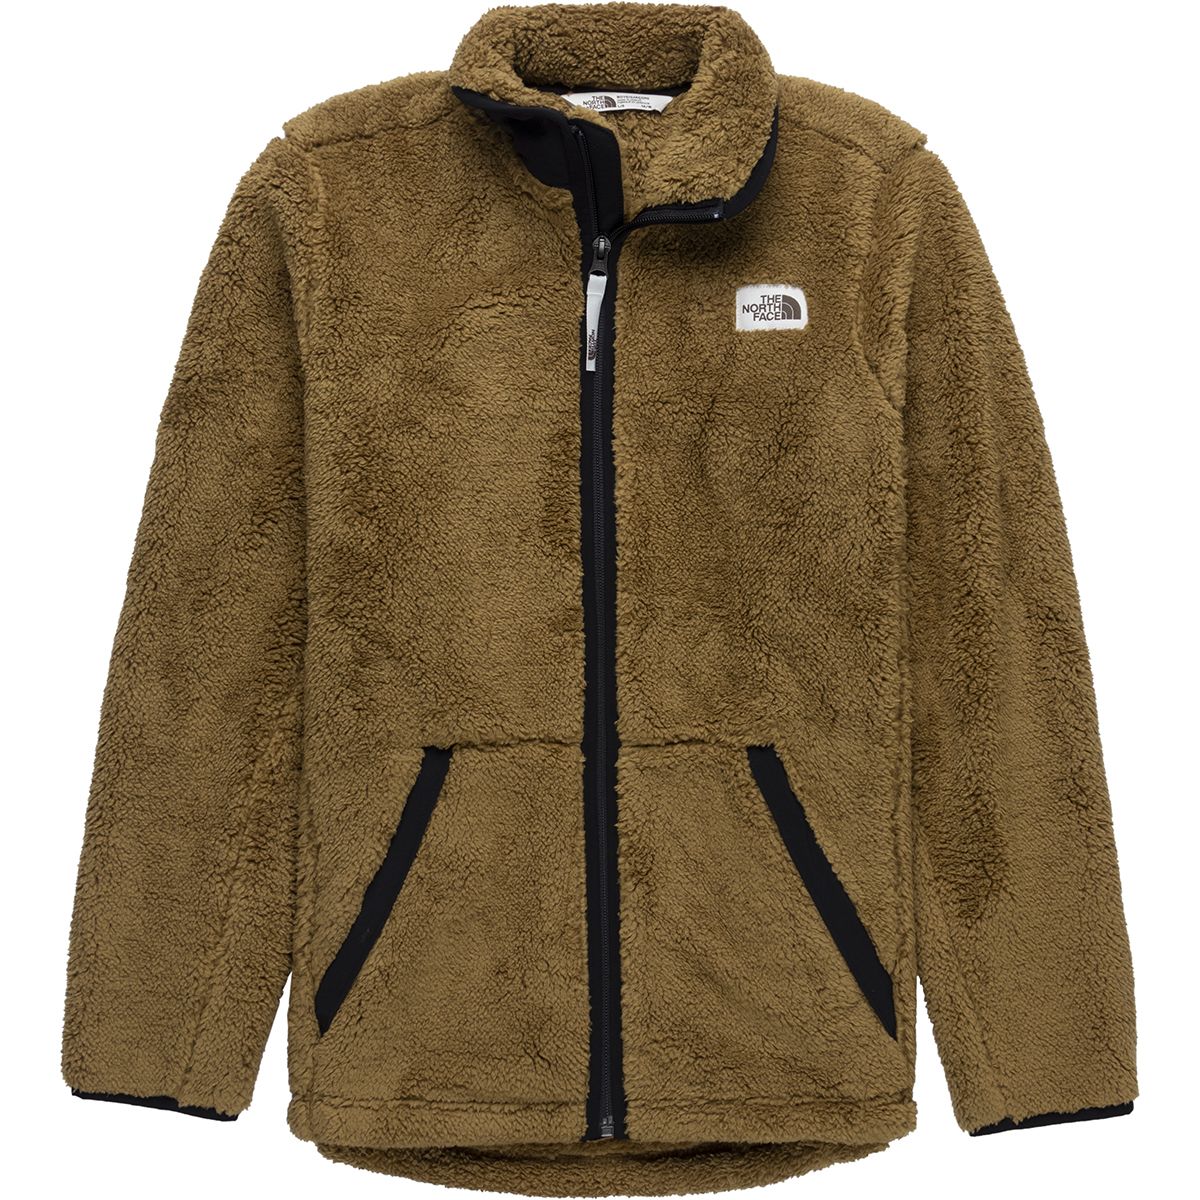 north face campshire fleece full zip